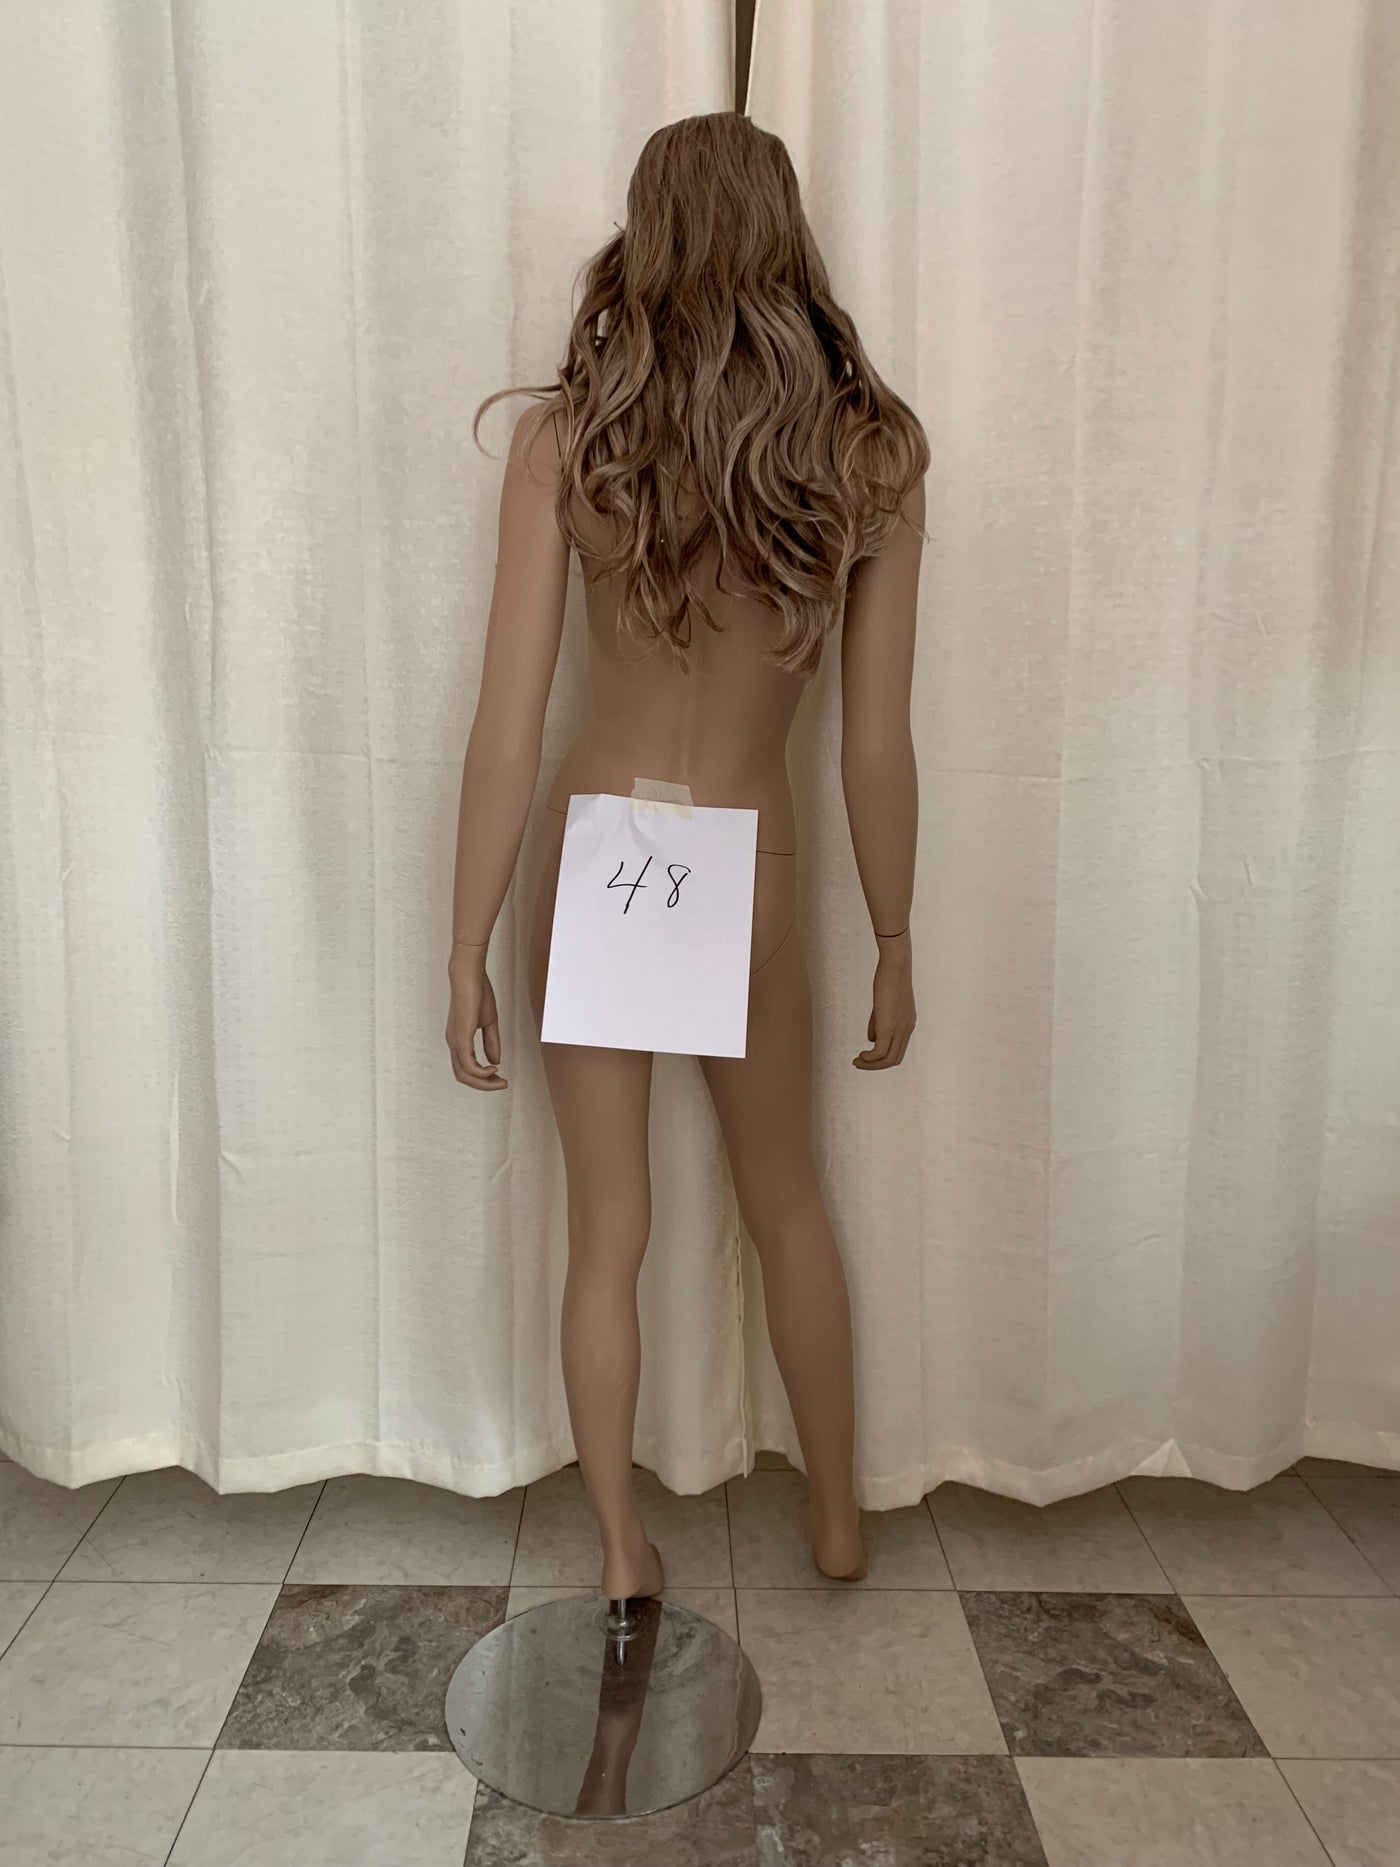 Used Female Adel Rootstein Mannequin  #48 Girl Thing